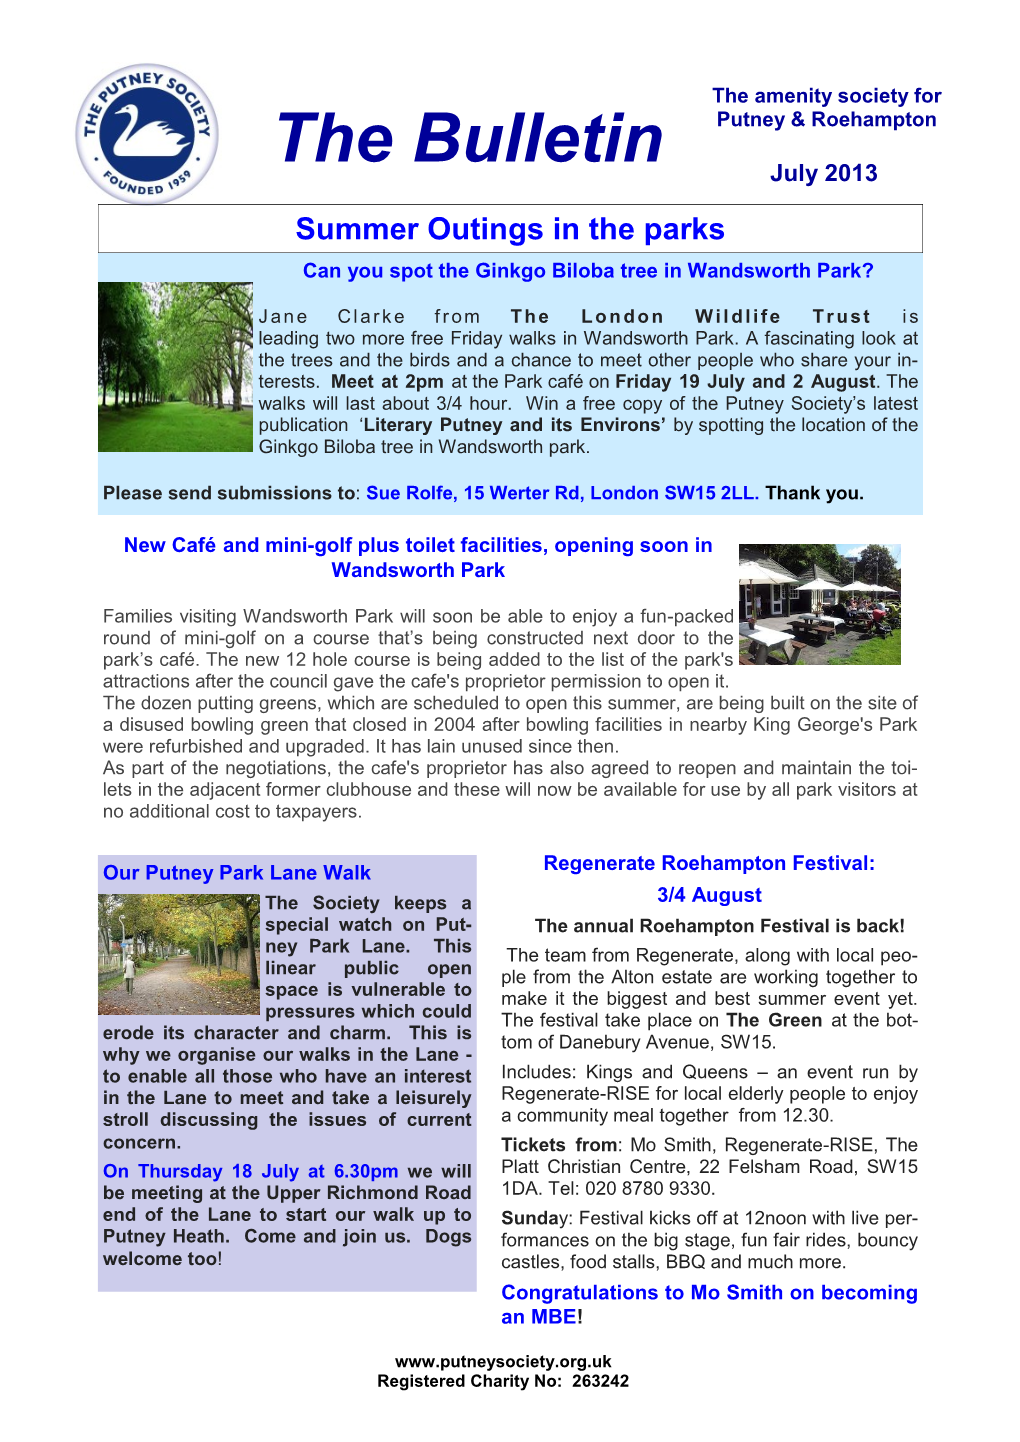 The Bulletin July 2013 Summer Outings in the Parks Can You Spot the Ginkgo Biloba Tree in Wandsworth Park?